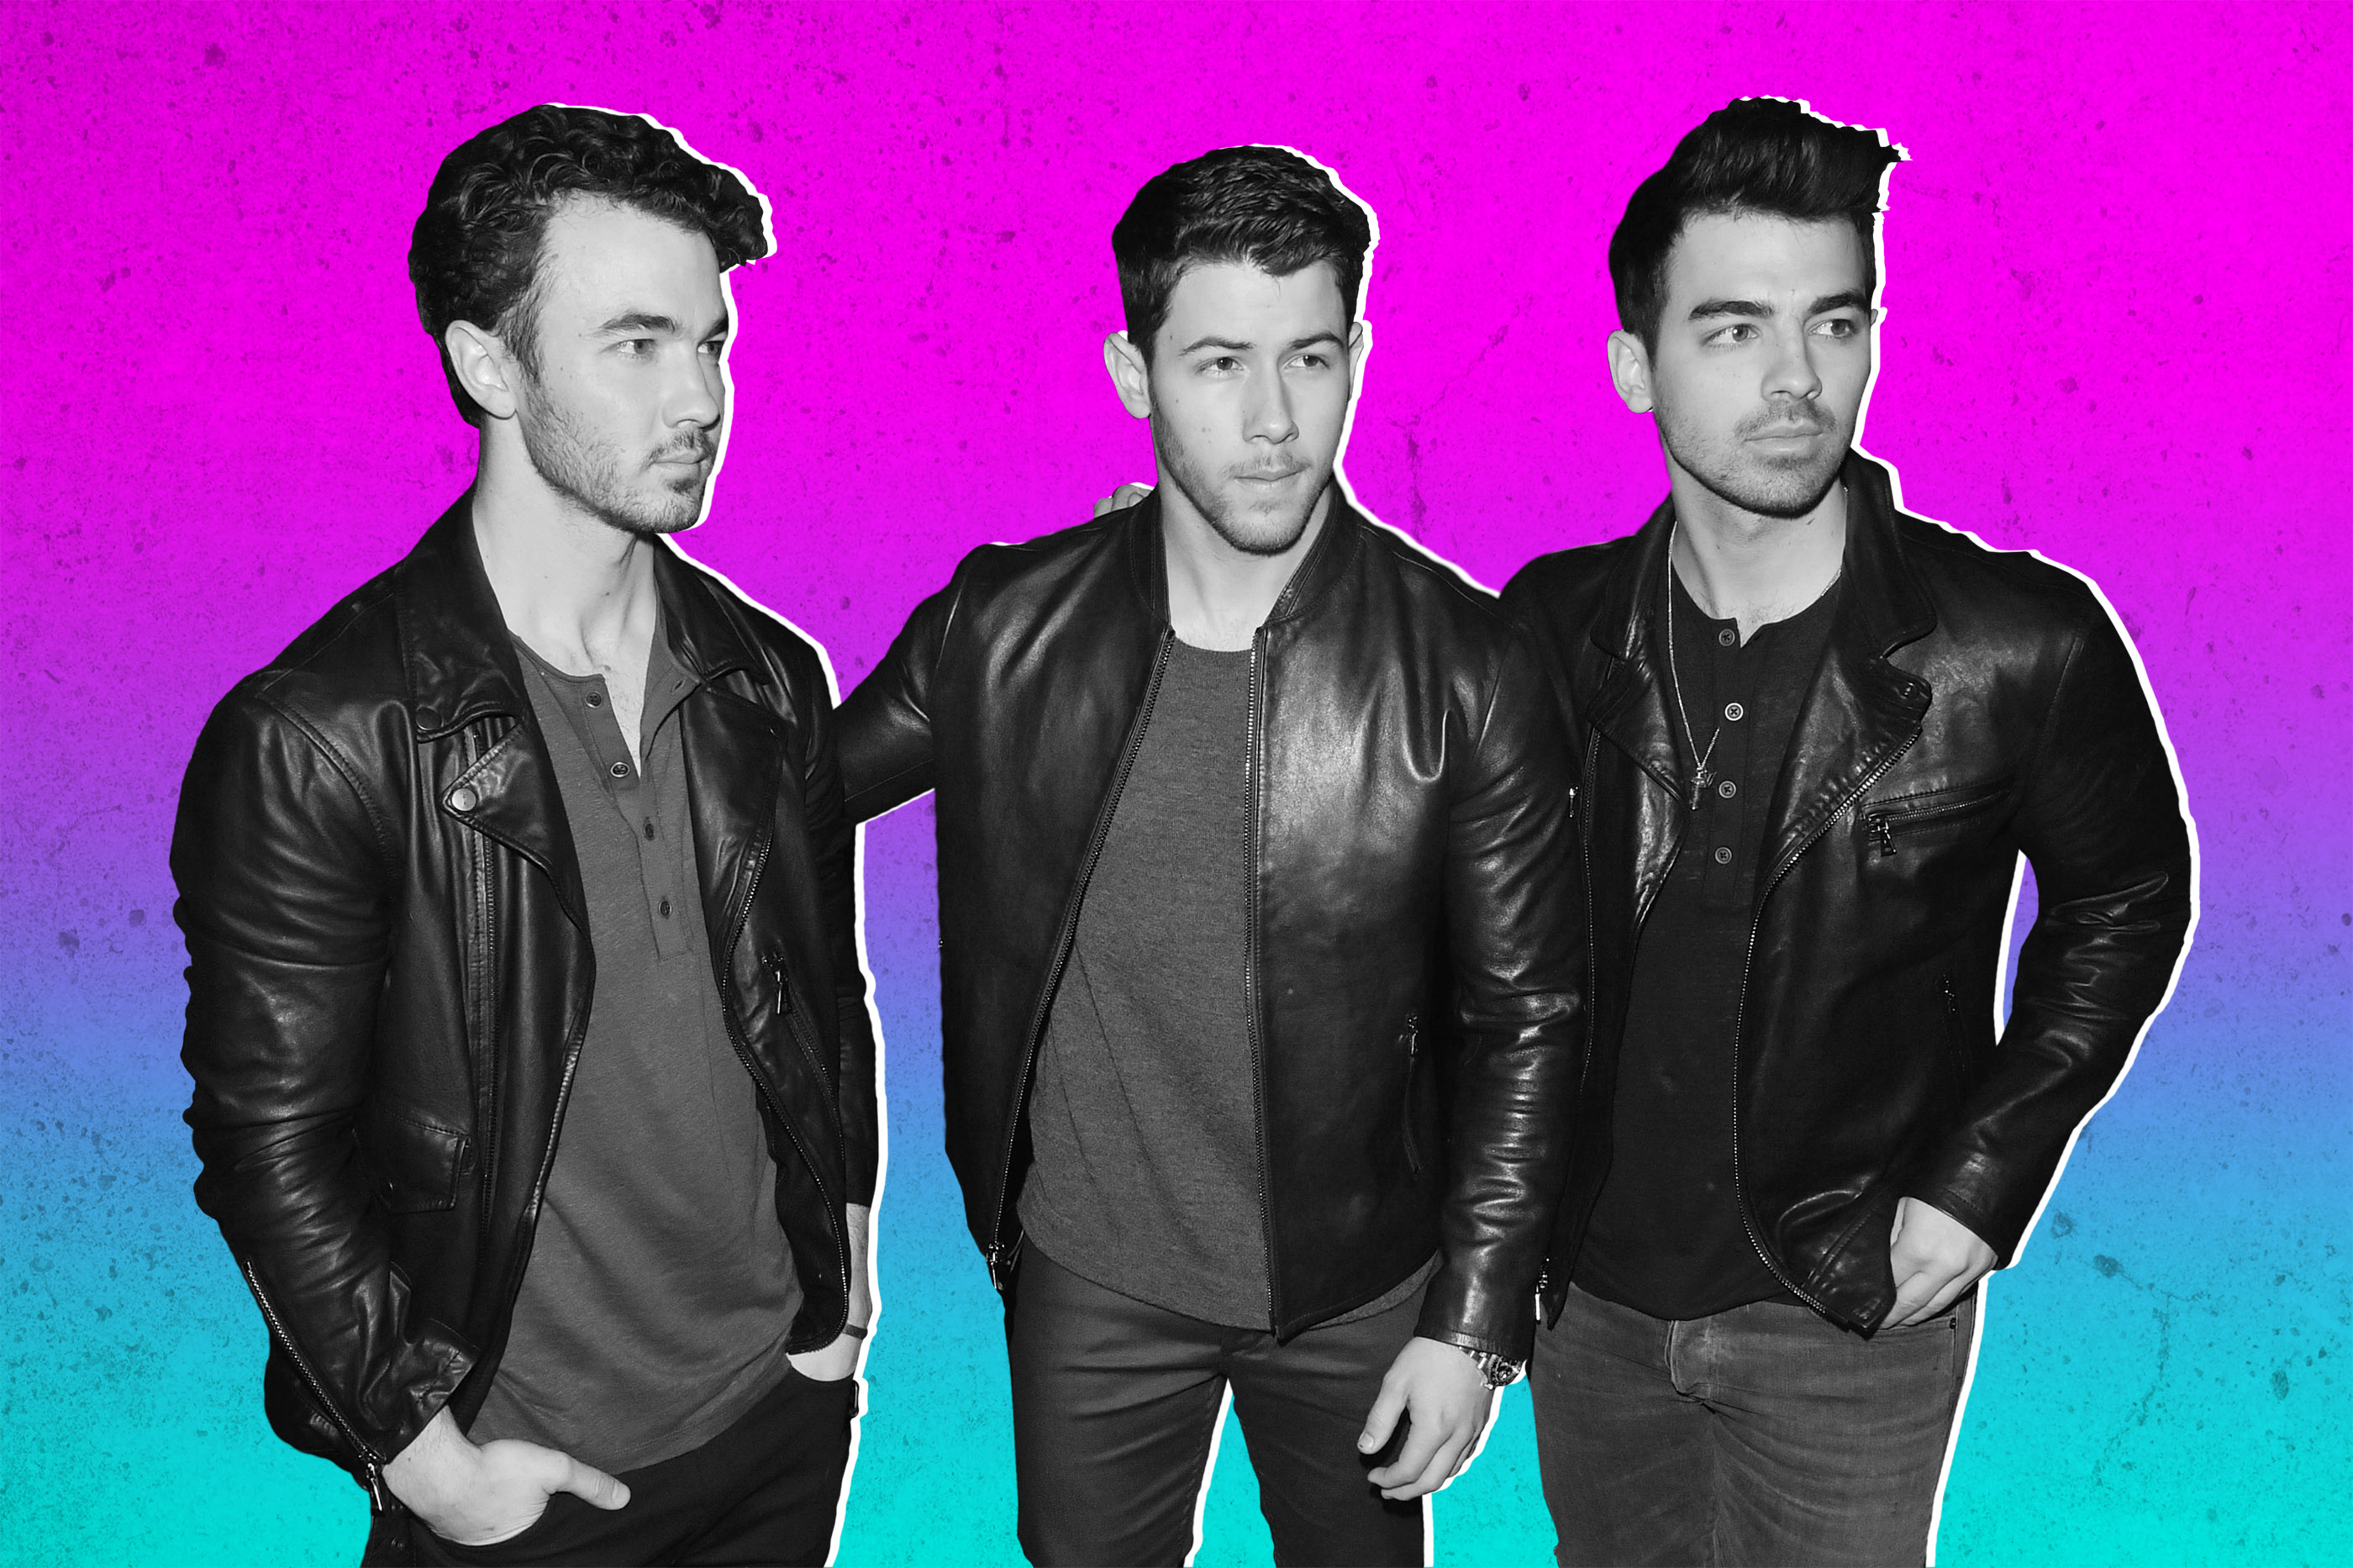 The Jonas Brothers Are Reuniting. Is Nick, Joe or Kevin the Richest?